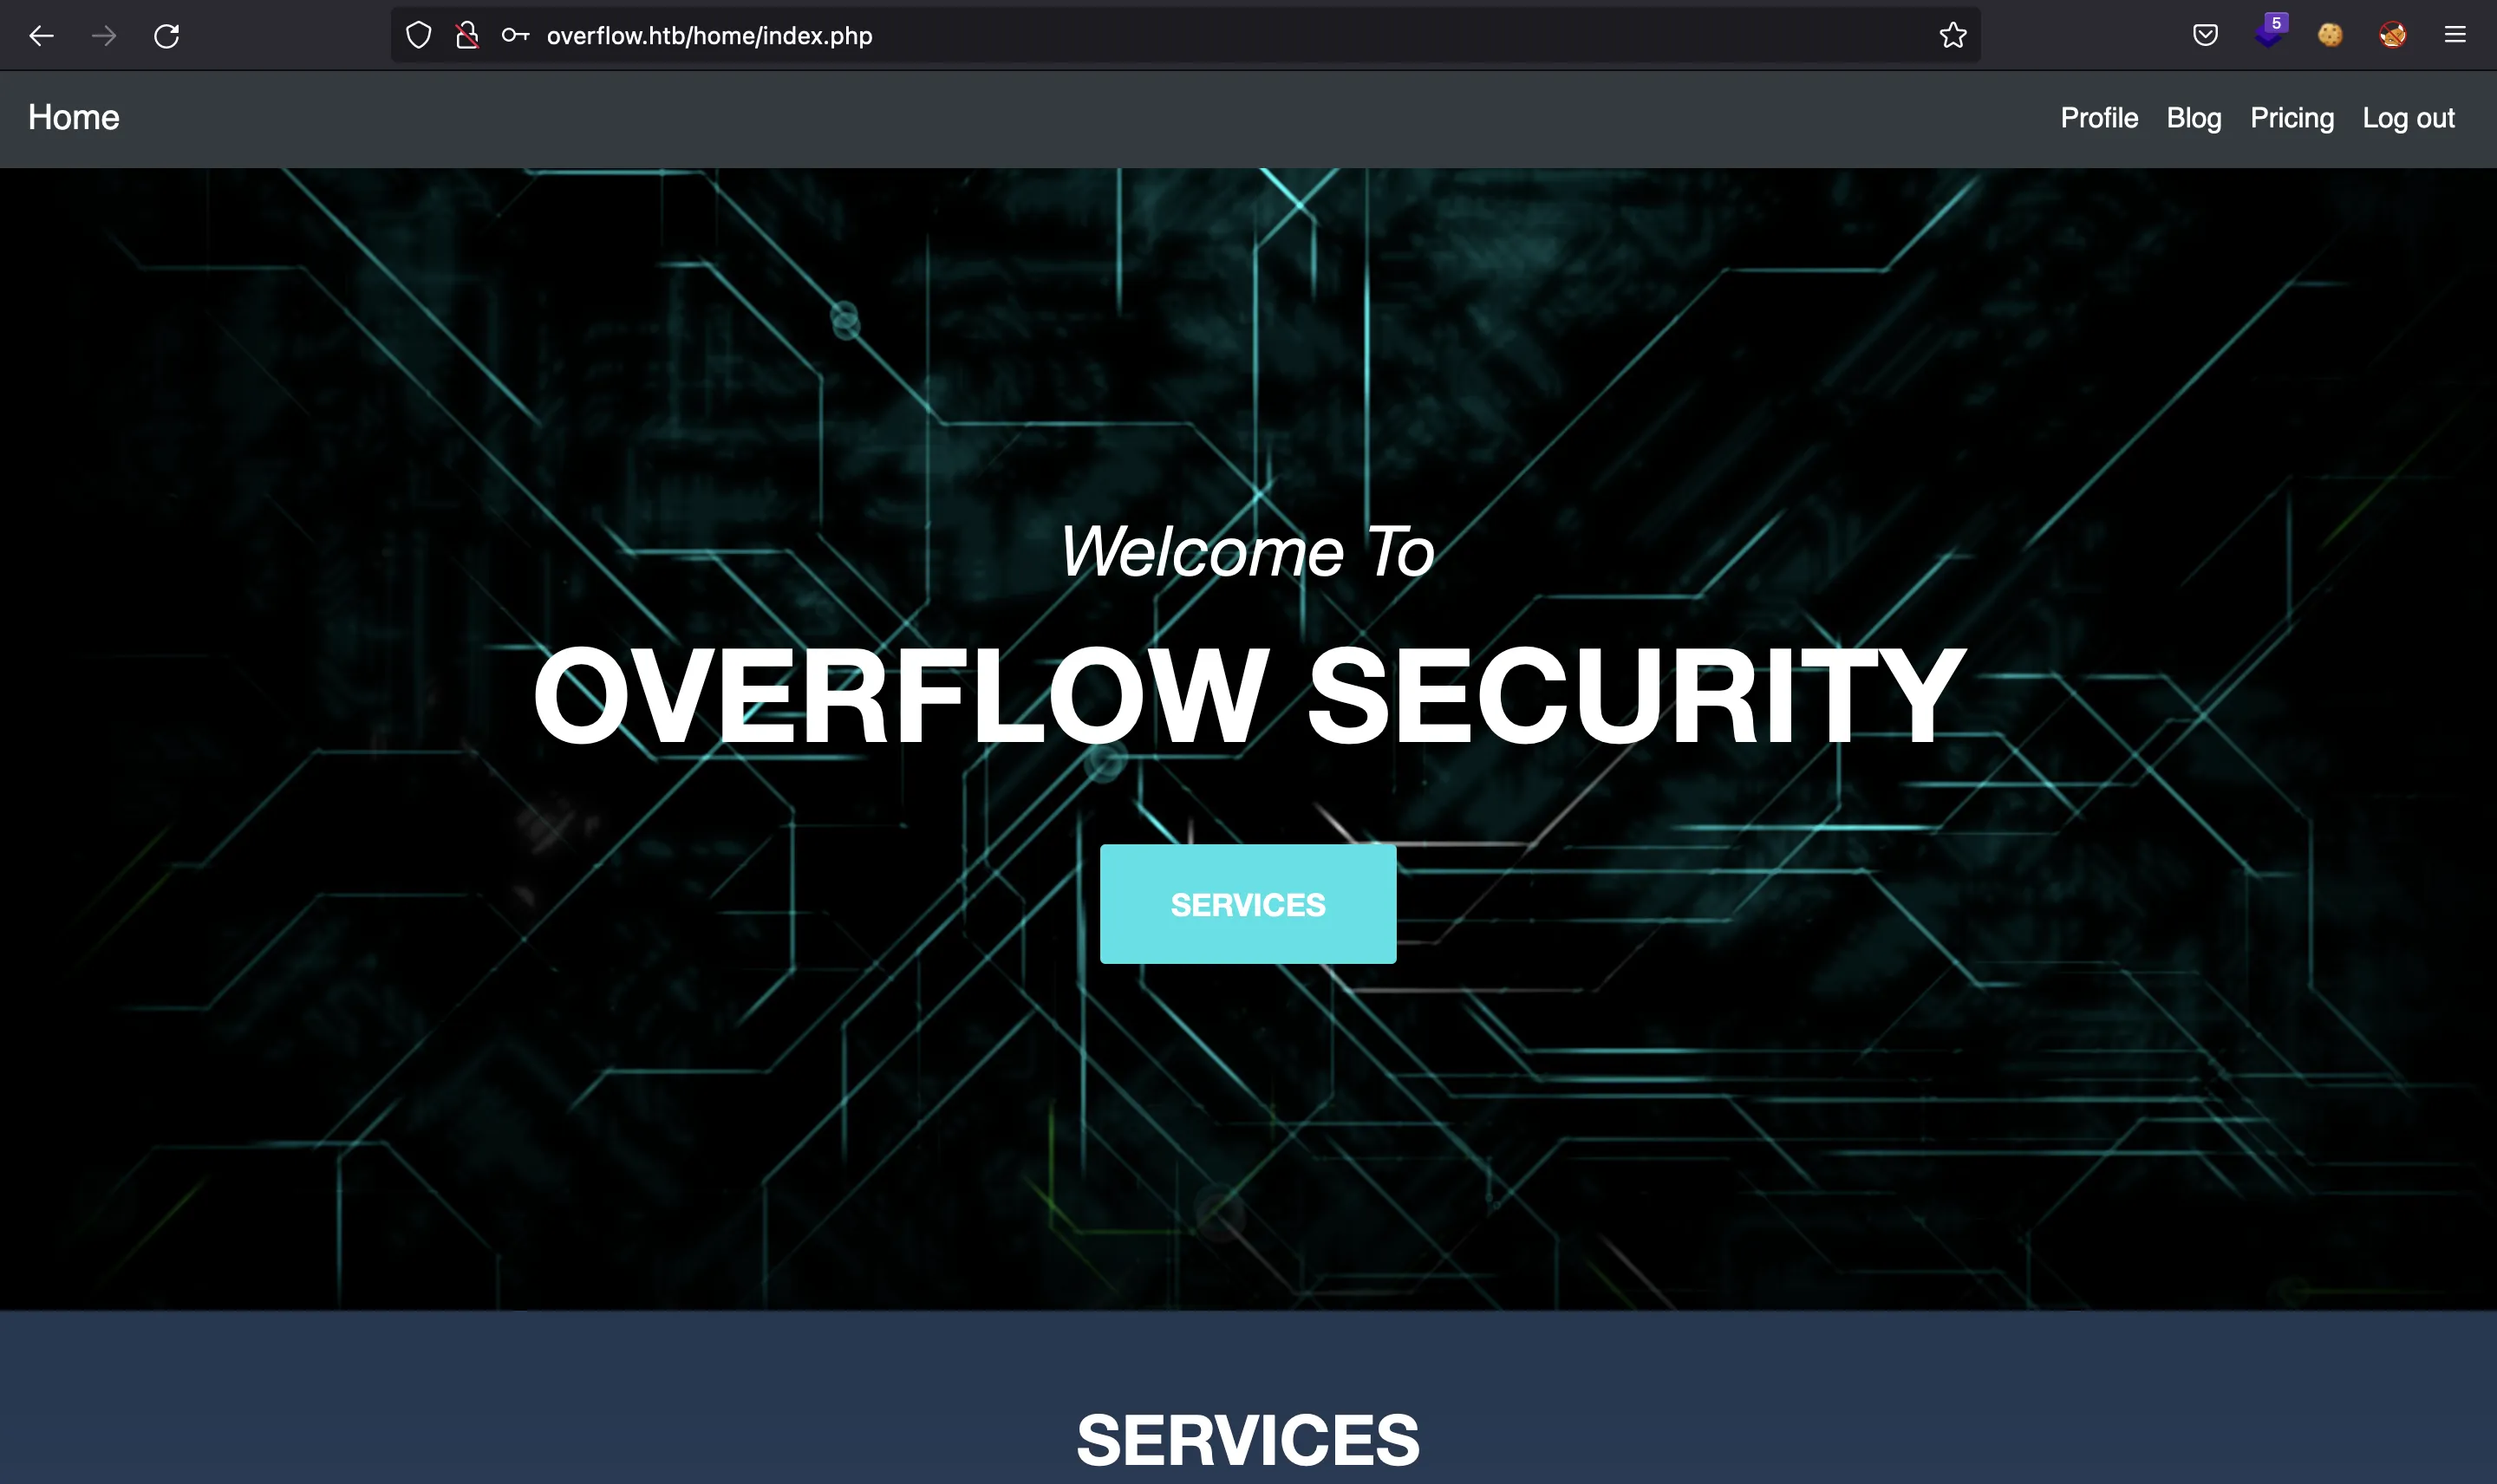 Overflow user access